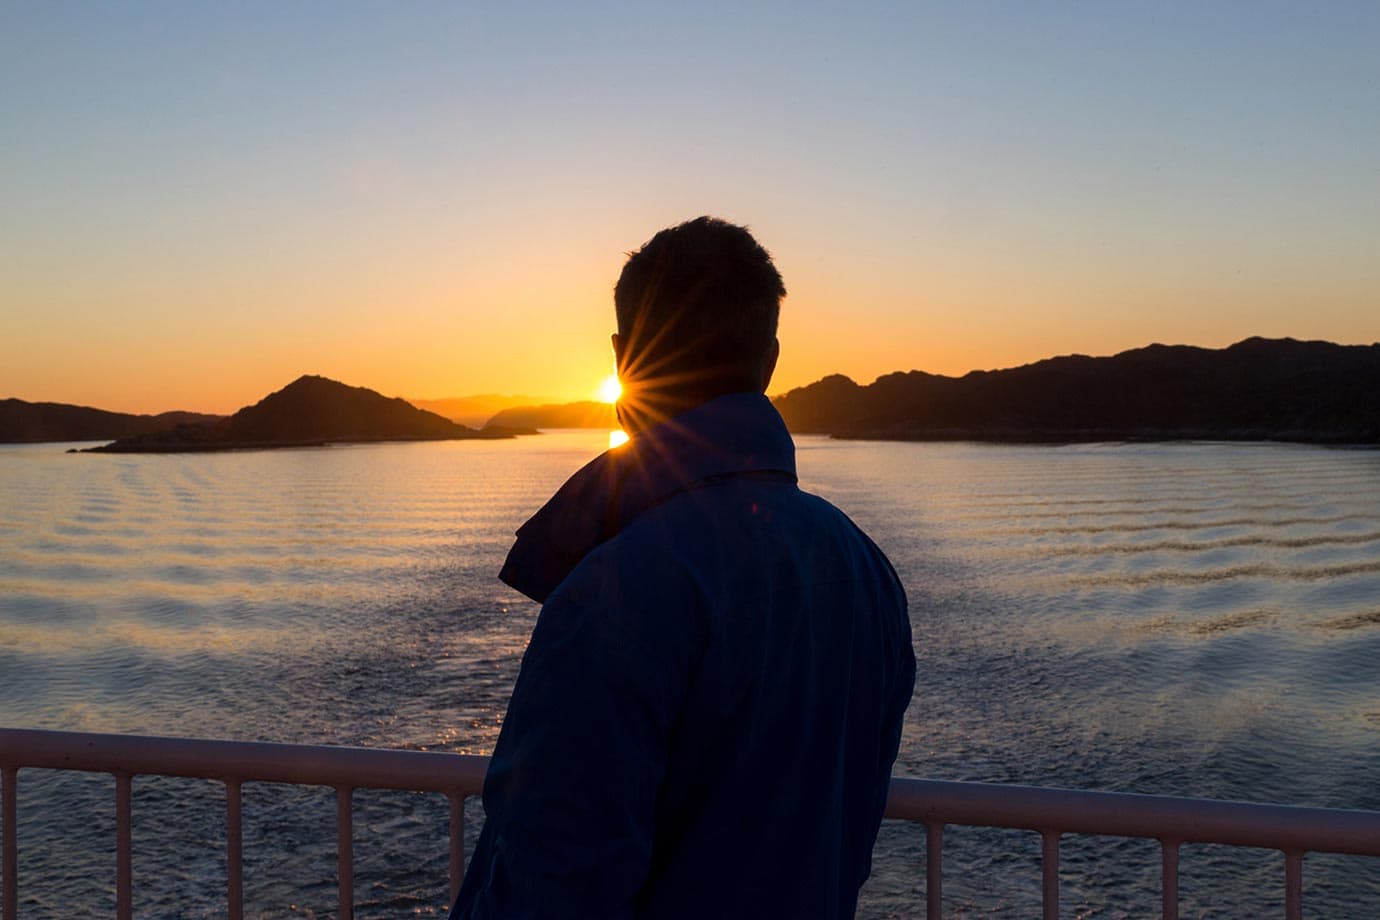 Watching sunset in Greenland